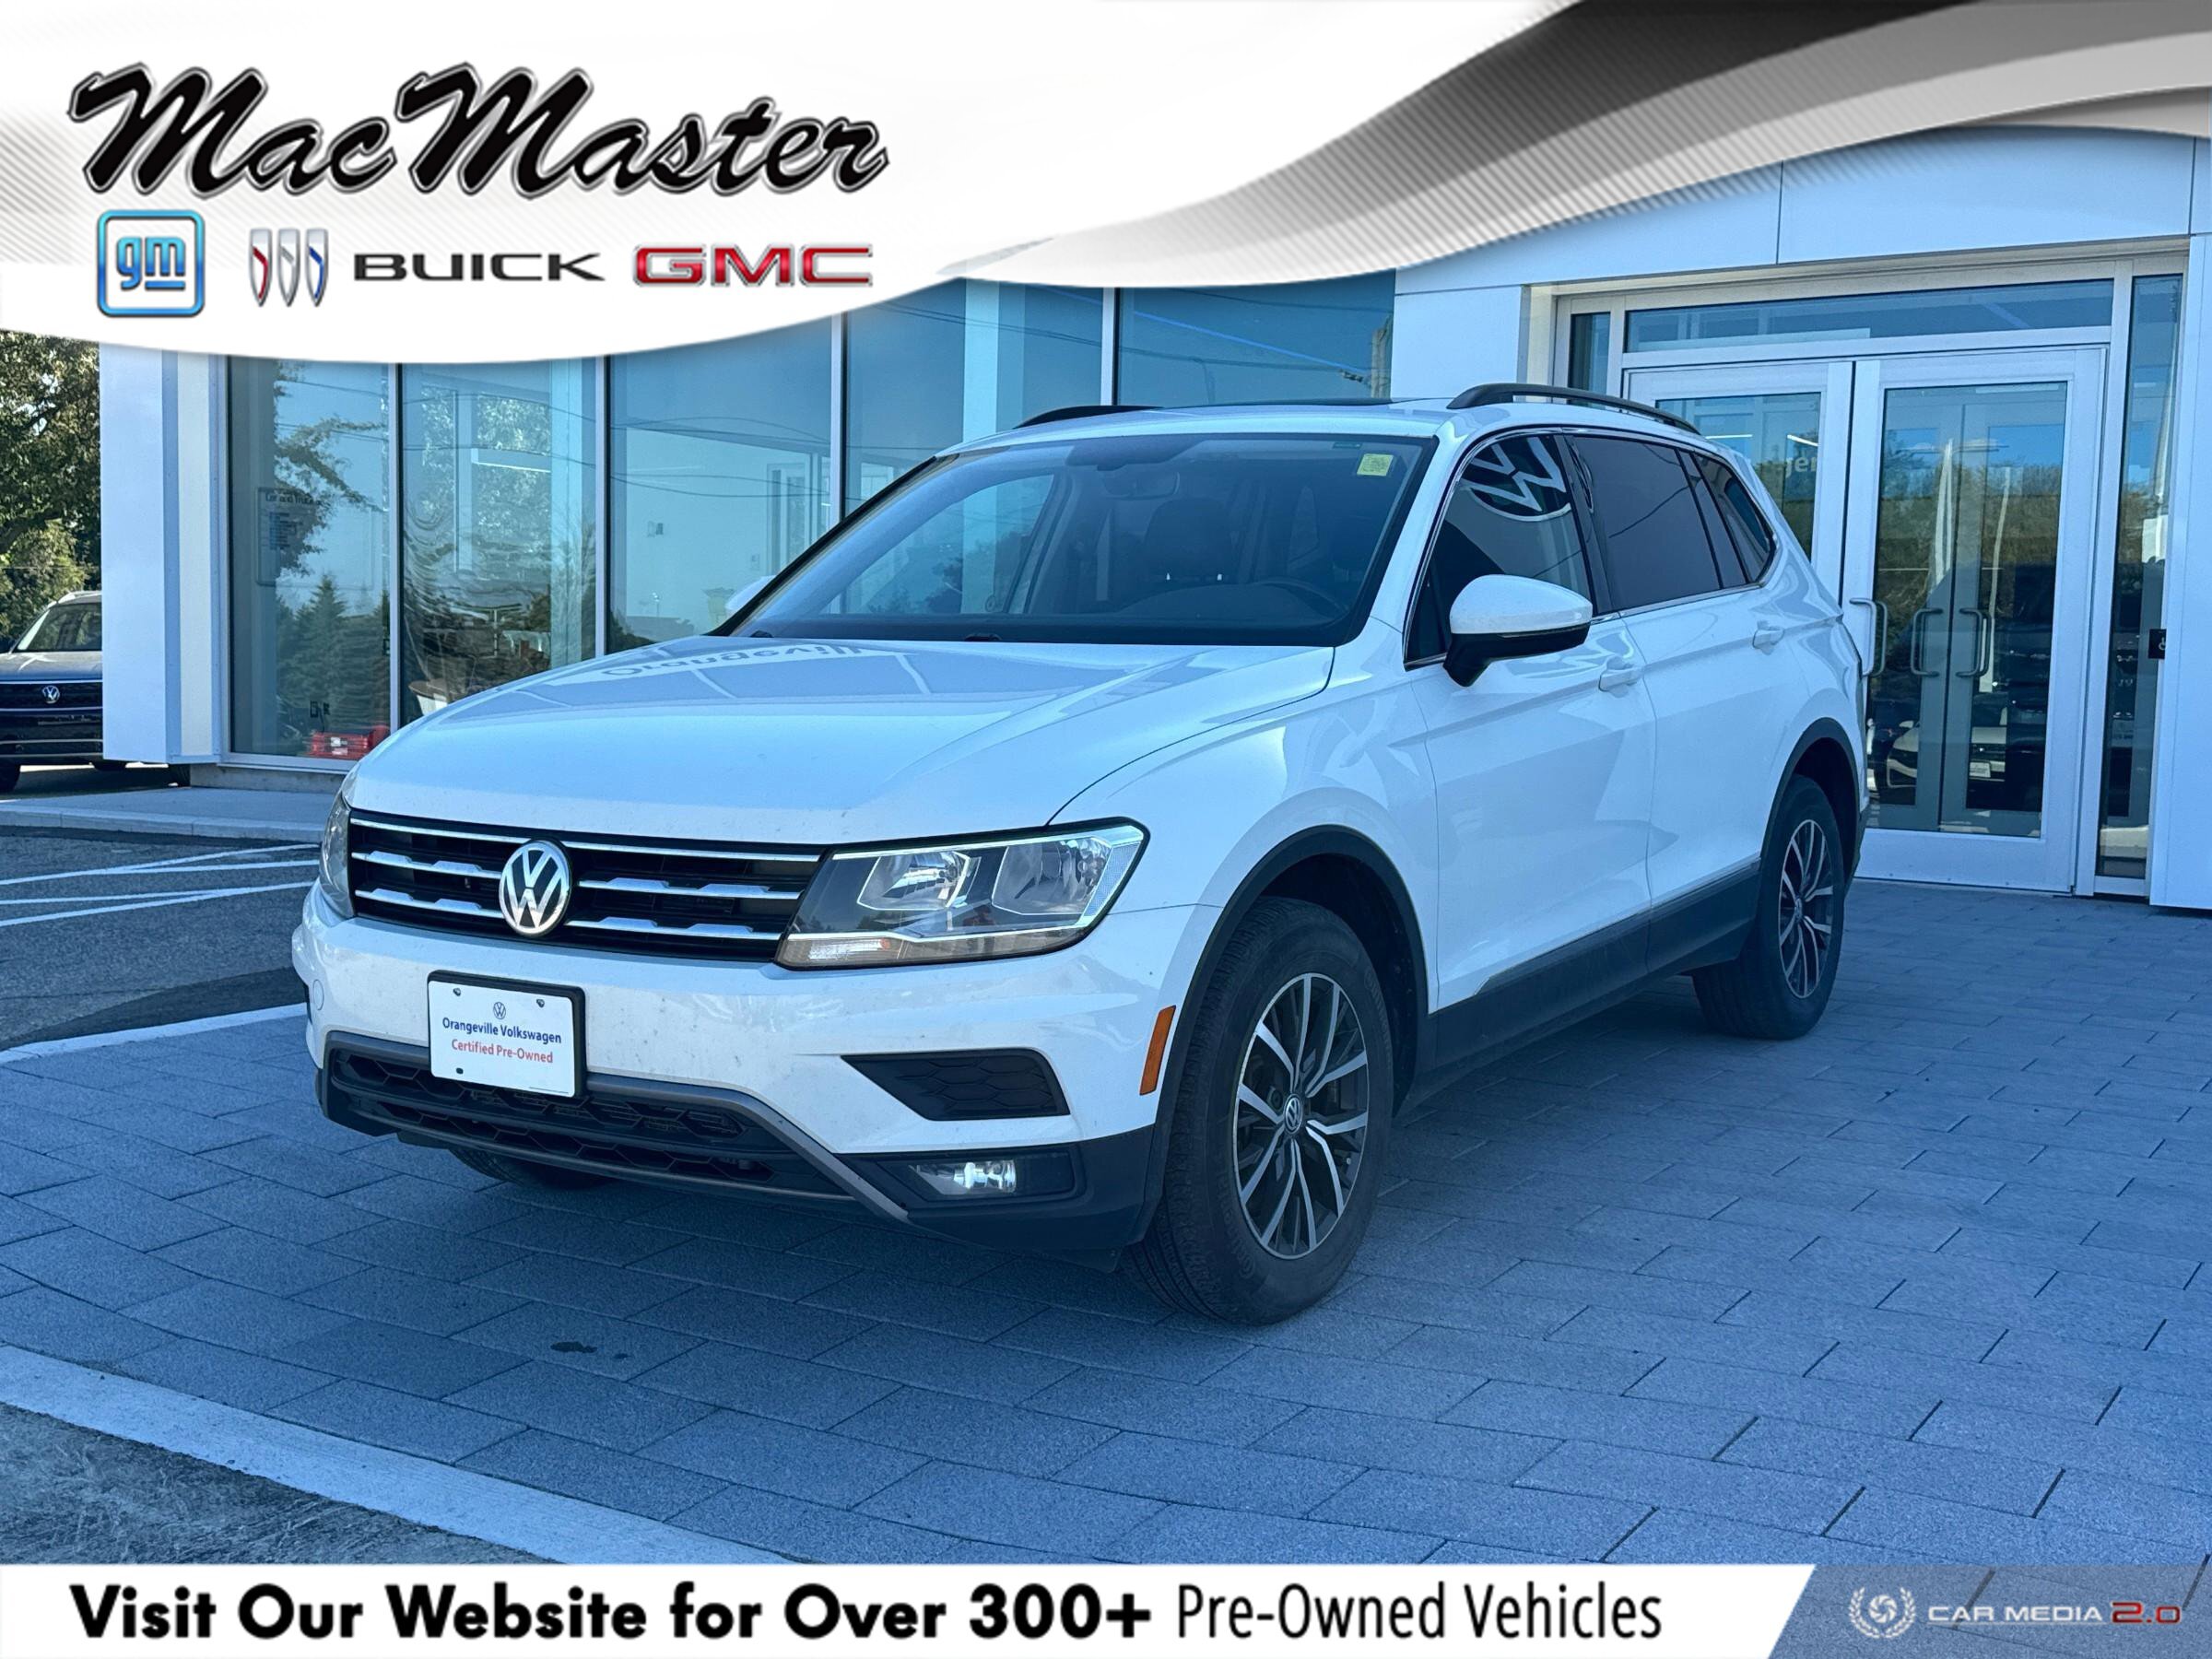 2019 Volkswagen Tiguan ComfortlineONE-OWNER, ACCICDENT-FREE, AWD, LEATHER